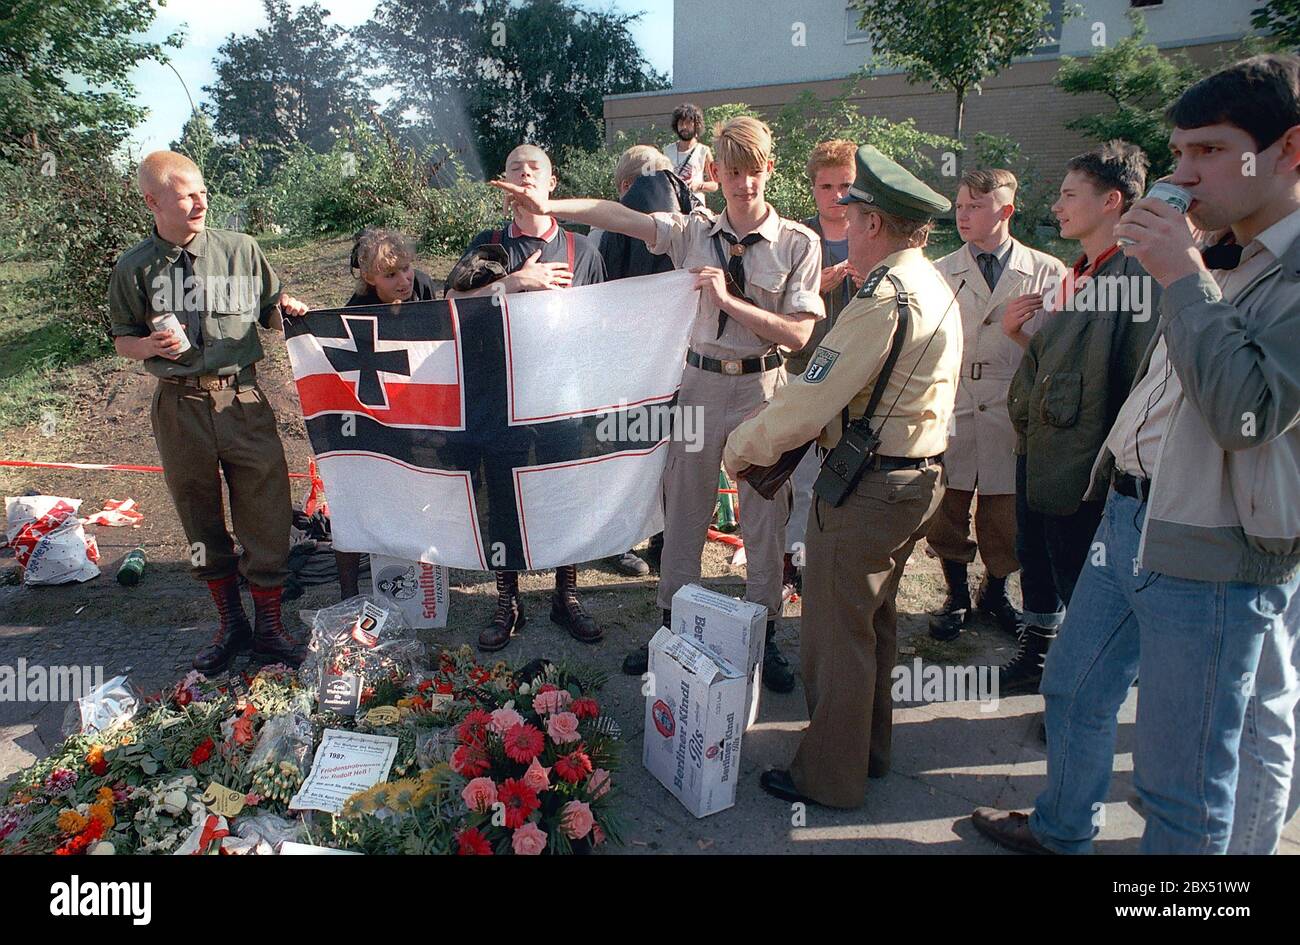 Berlin-Spandau / Nazis / right wing groups 20.8.1987 In front of the war criminals' prison in Spandau, Rudolf Hess has just died. The right-wing groups are gathering in mourning. Young right-wing radical Michael Wendt (right) with the Reich war flag and the Kuehnen salute, a variation of the Hitler salute, which was banned. A policeman inquires what this is all about. Flowers in front for Hess. // Nazi / Fascism / *** Local Caption *** The Prison for war criminals in Berlin-Spandau. The last prisoner, Rudolf Hess, just died after 46 years in the prison shown in the background. Right wing Stock Photo